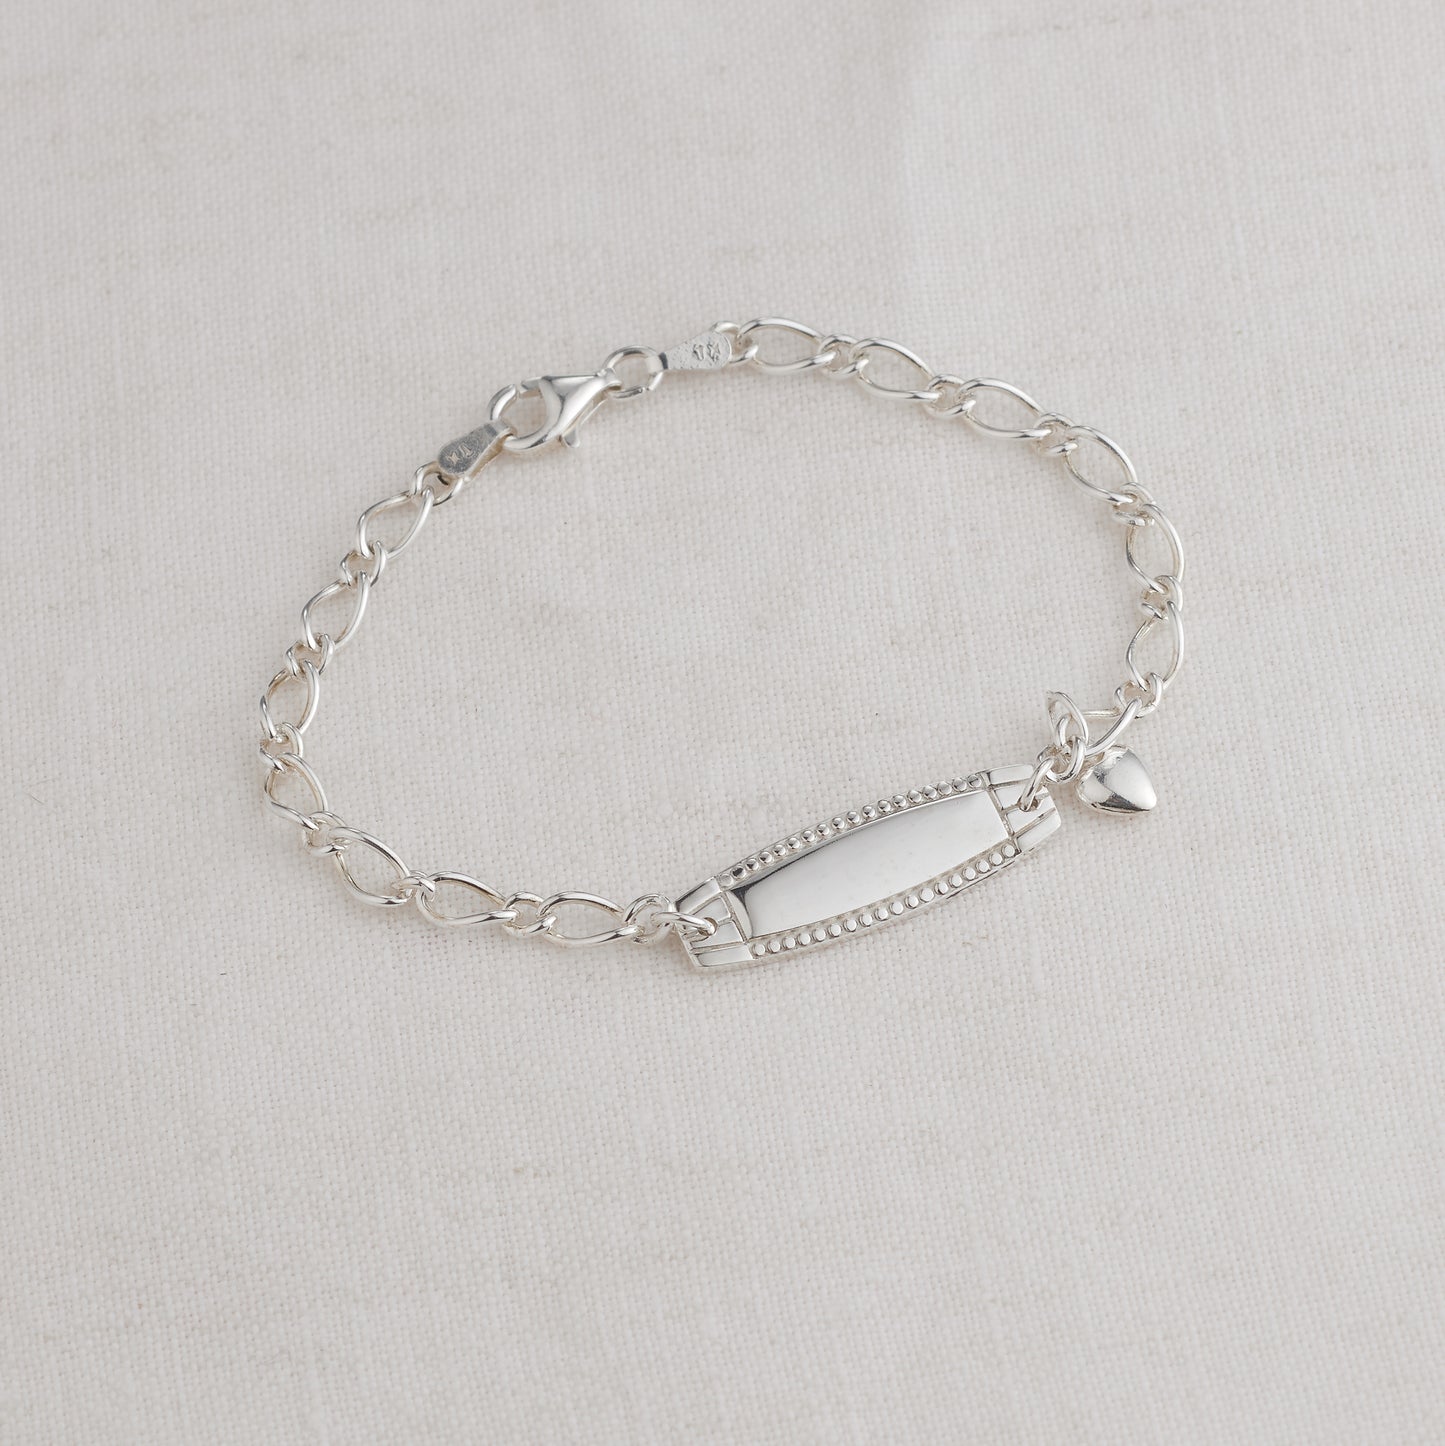 Sterling Silver Figaro Identity Bracelet with Heart Charm 15cm